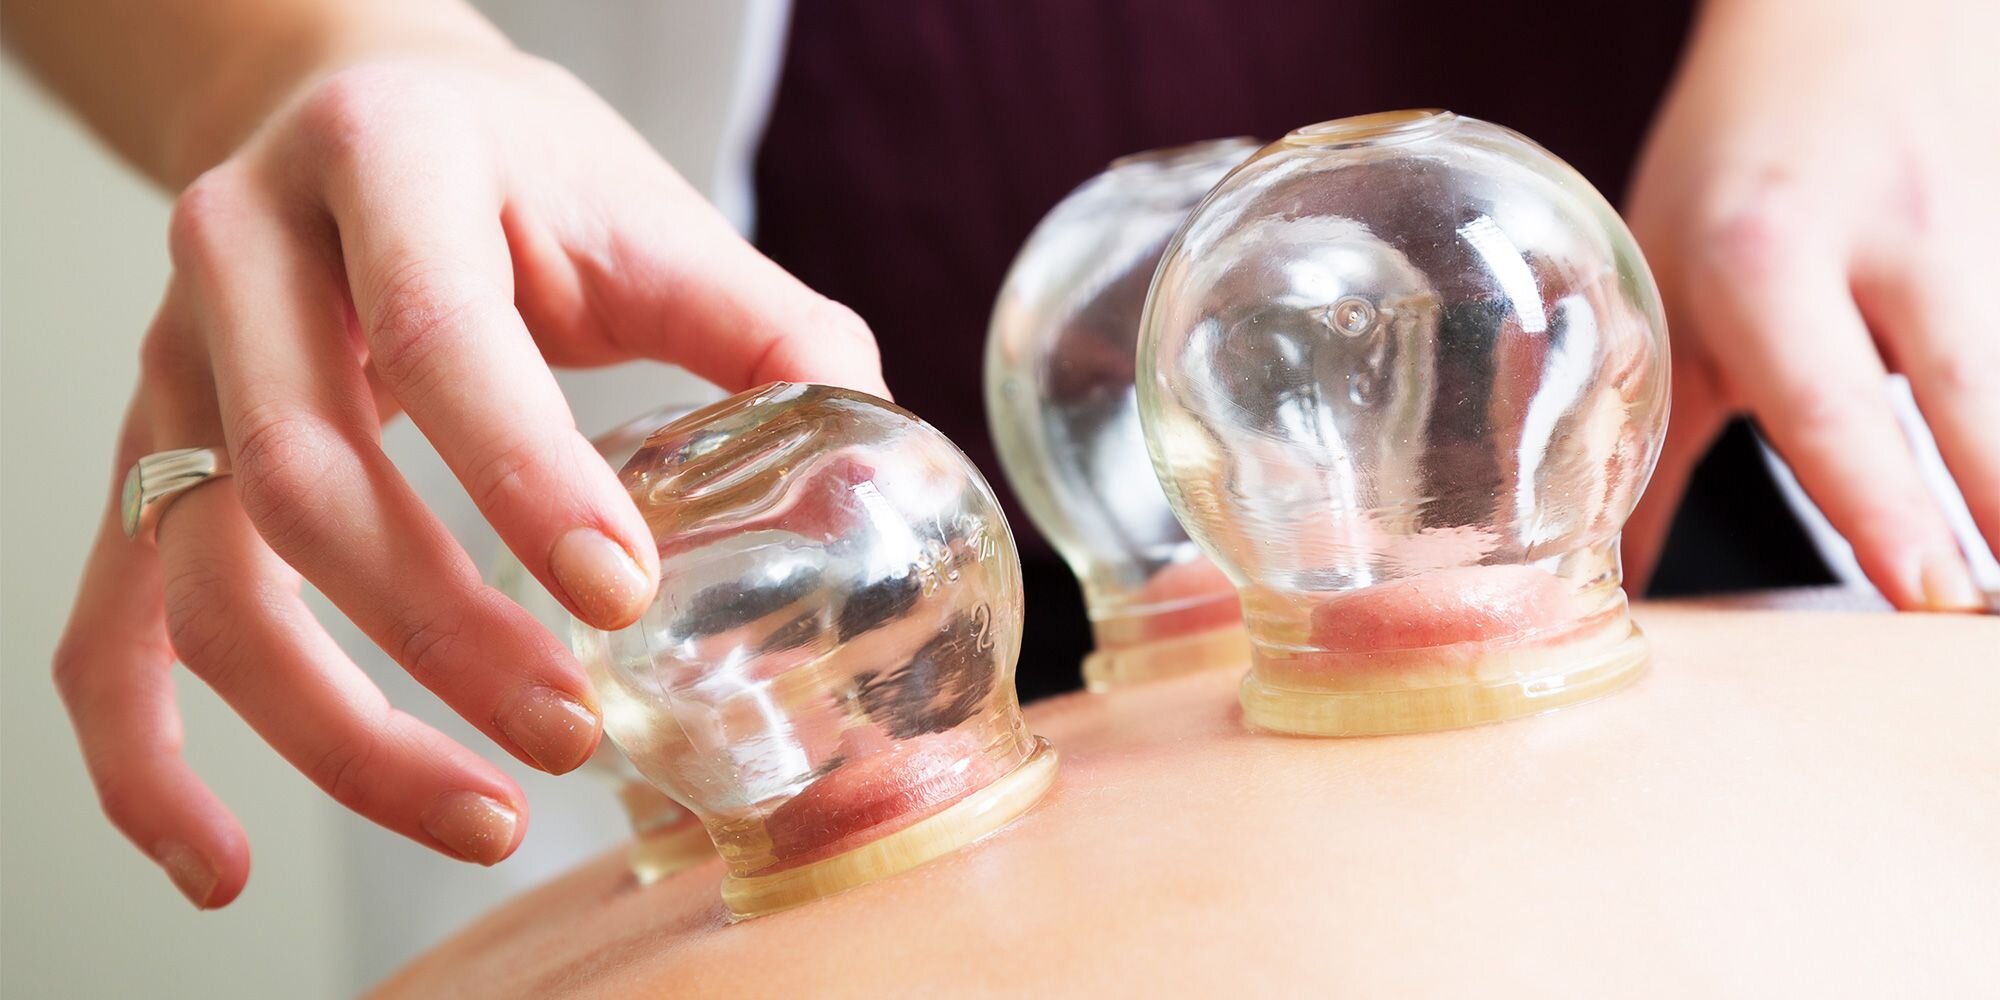 cupping-and-chronic-pain-1530049333.jpg